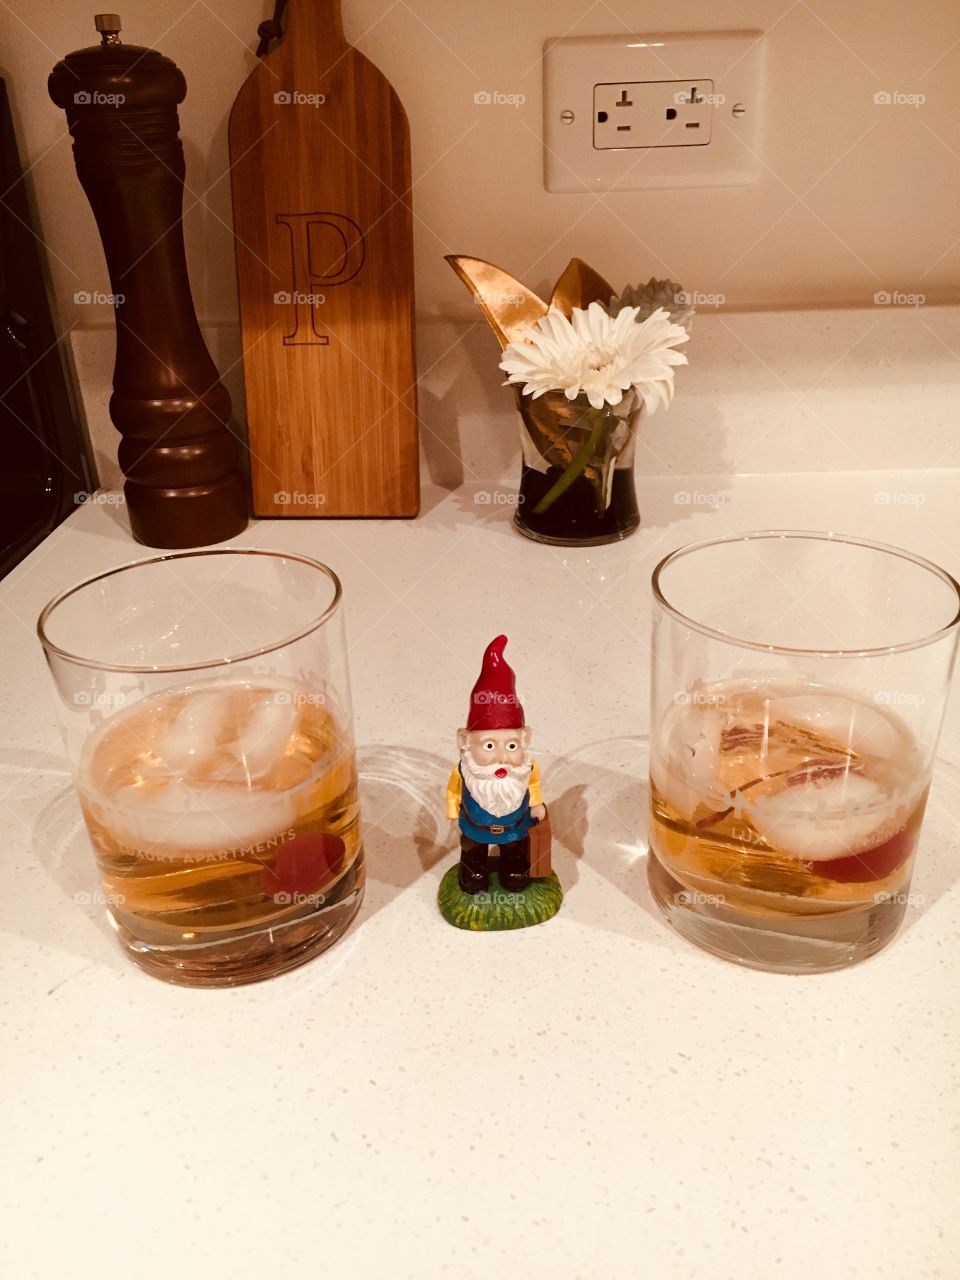 Gnomey hitting up some delicious old fashioneds in our new house. Smooth bourbon, luxardo cherrys. Delish